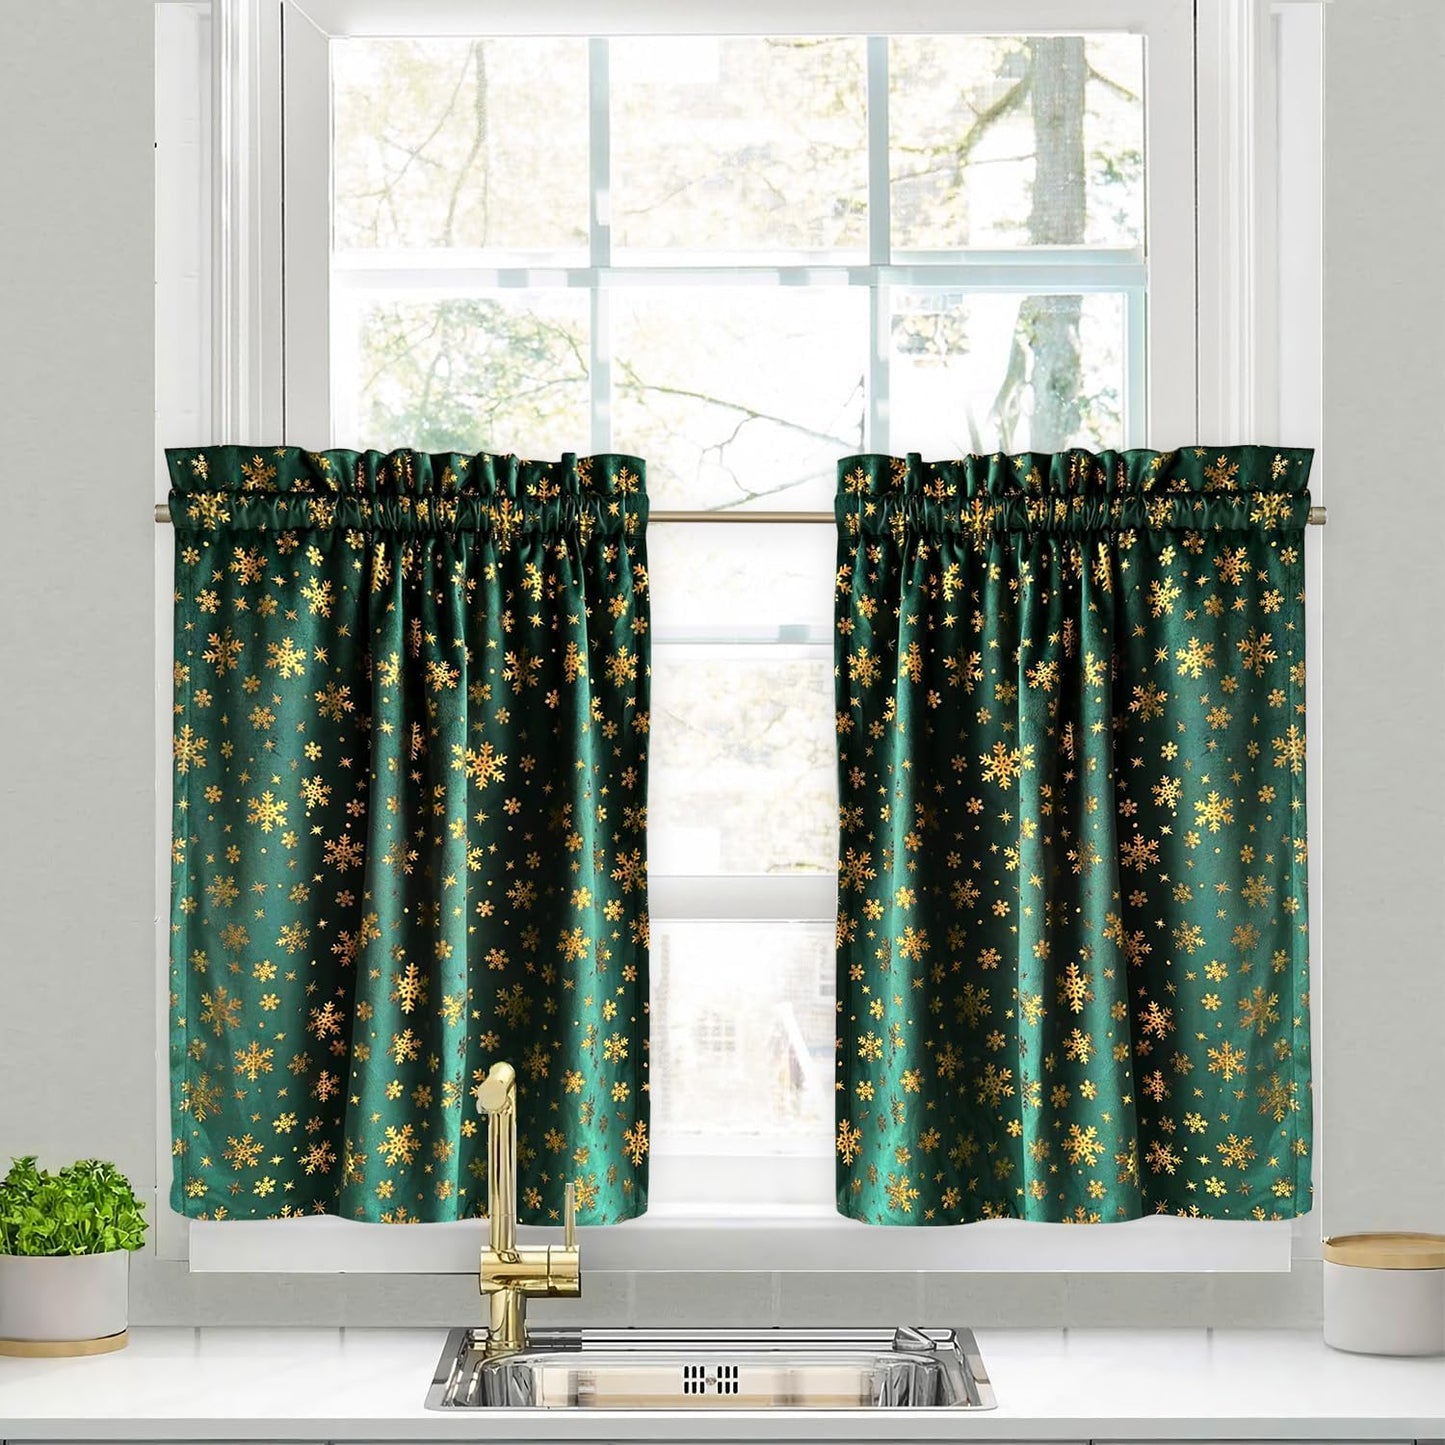 CUCRAF Blackout Curtains 84 Inches Long for Living Room, Light Beige Room Darkening Window Curtain Panels, Rod Pocket Thermal Insulated Solid Drapes for Bedroom, 52X84 Inch, Set of 2 Panels  CUCRAF Dark Green 45"L X 27"W 